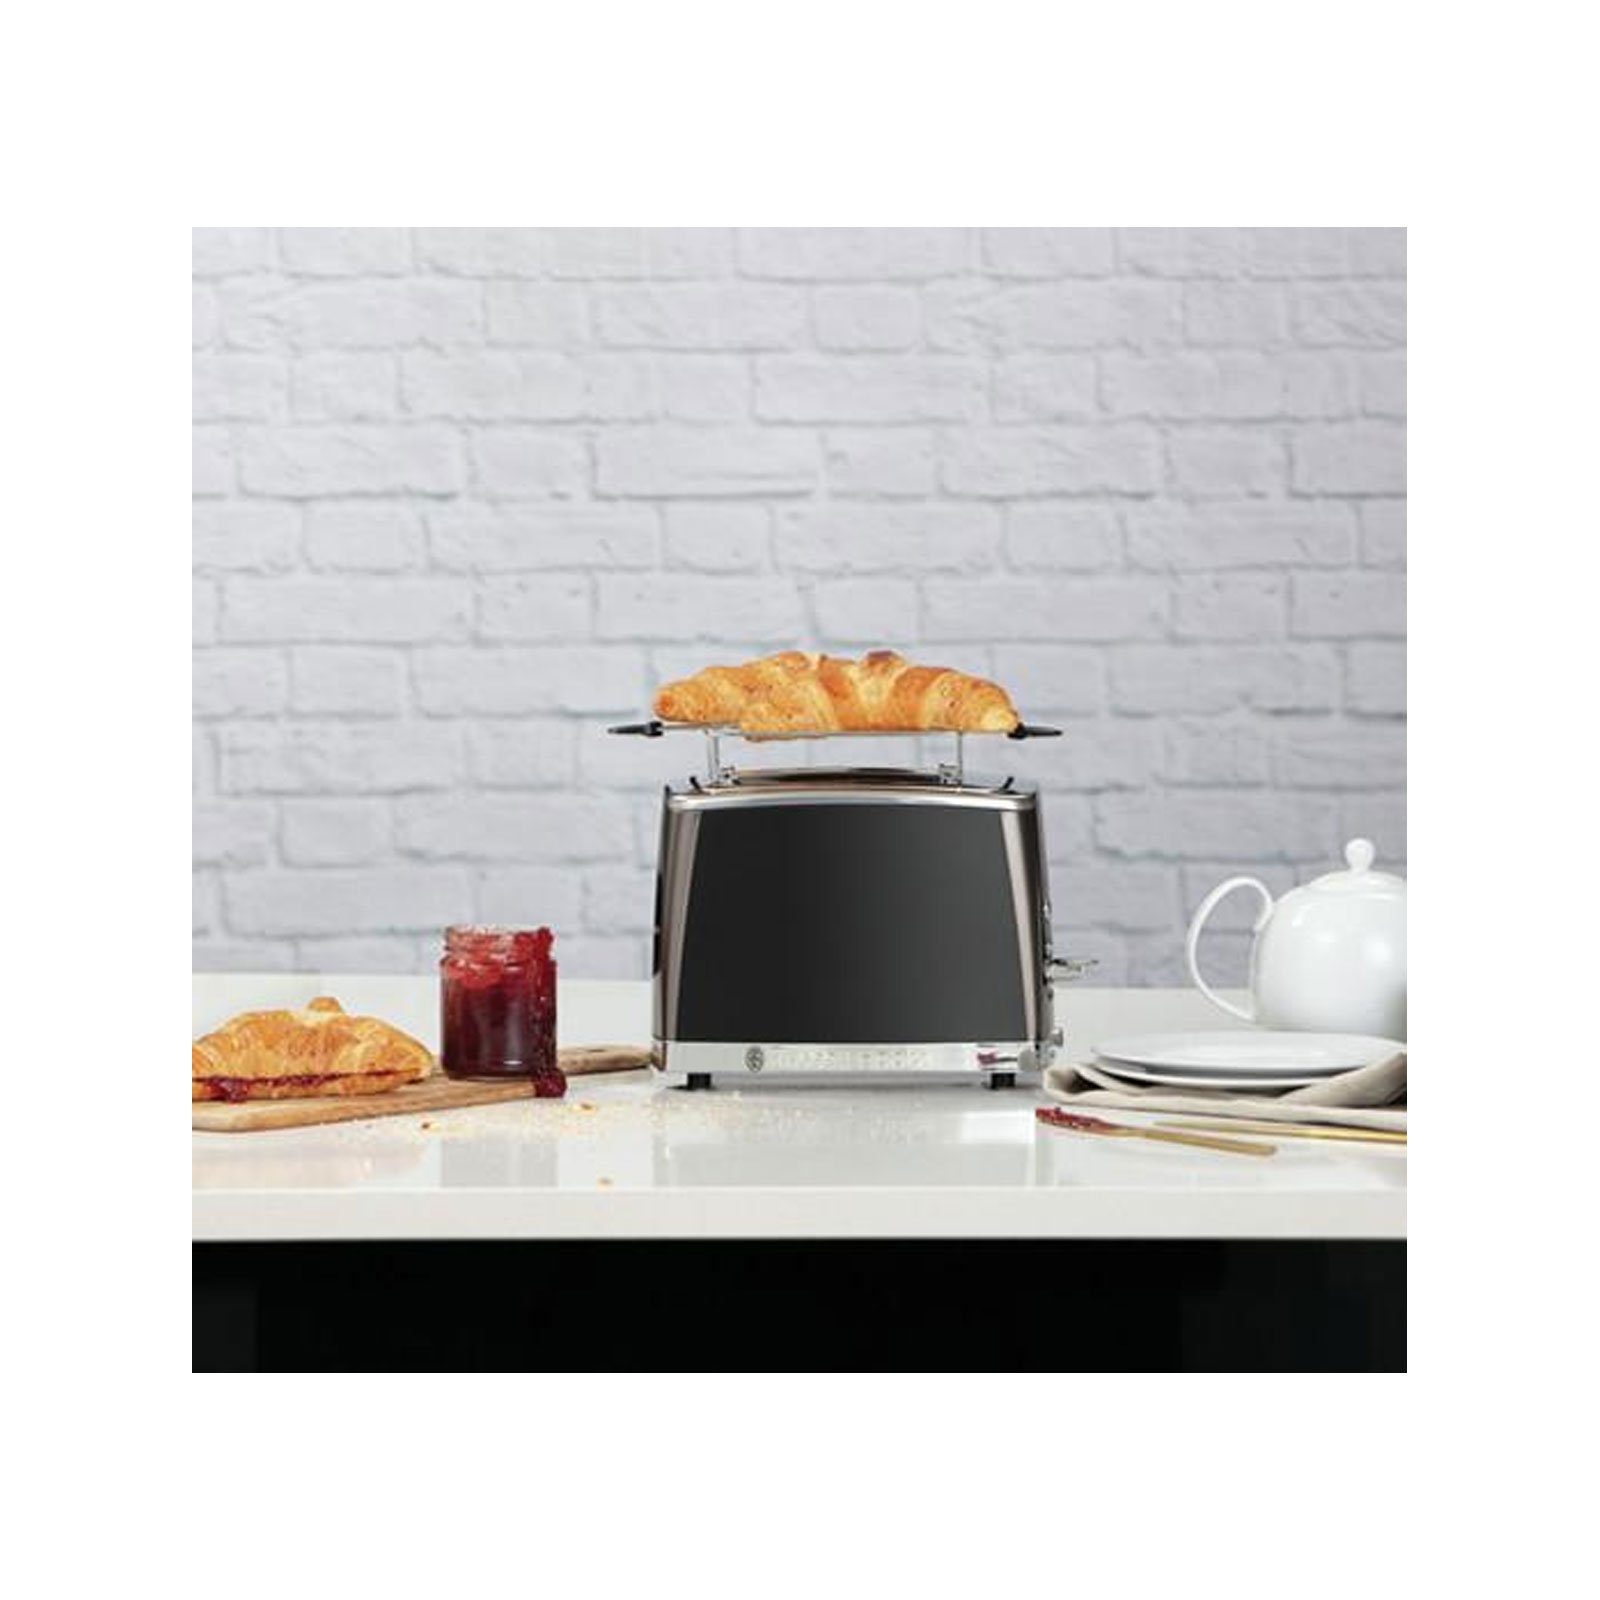 W RUSSELL HOBBS 1550 26150-56, Toaster